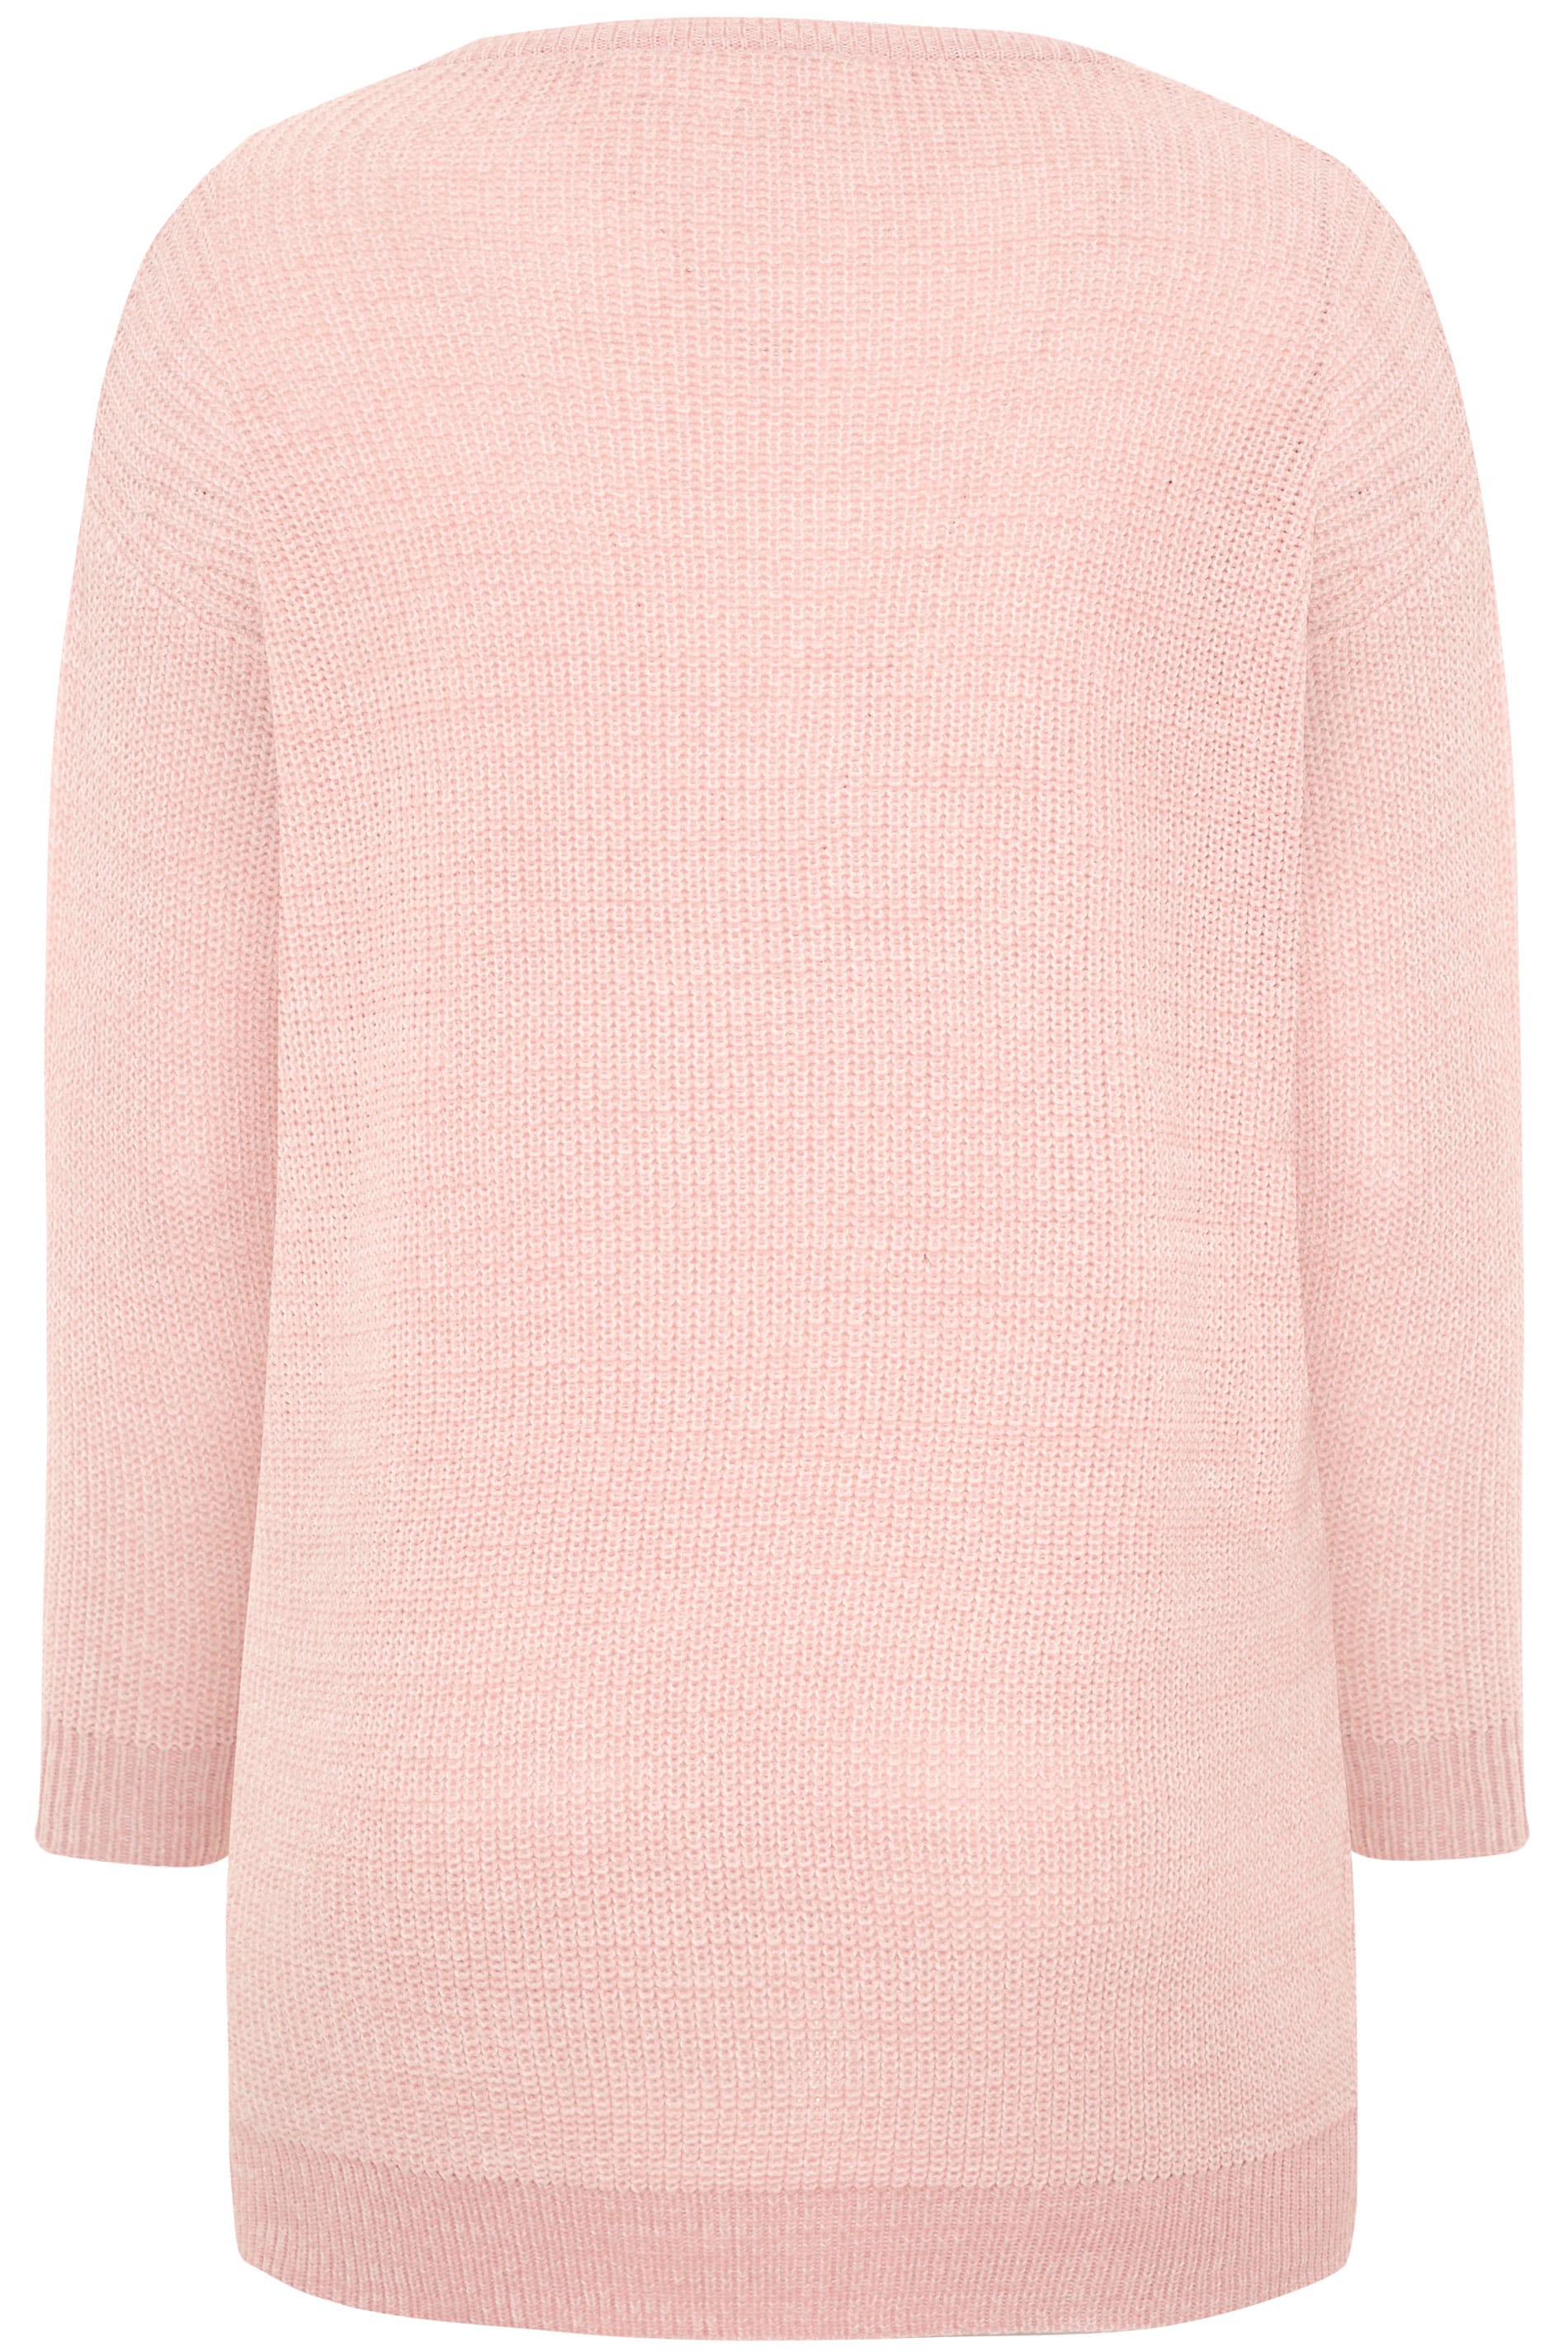 Pastel Pink Chunky Knitted Jumper | Yours Clothing